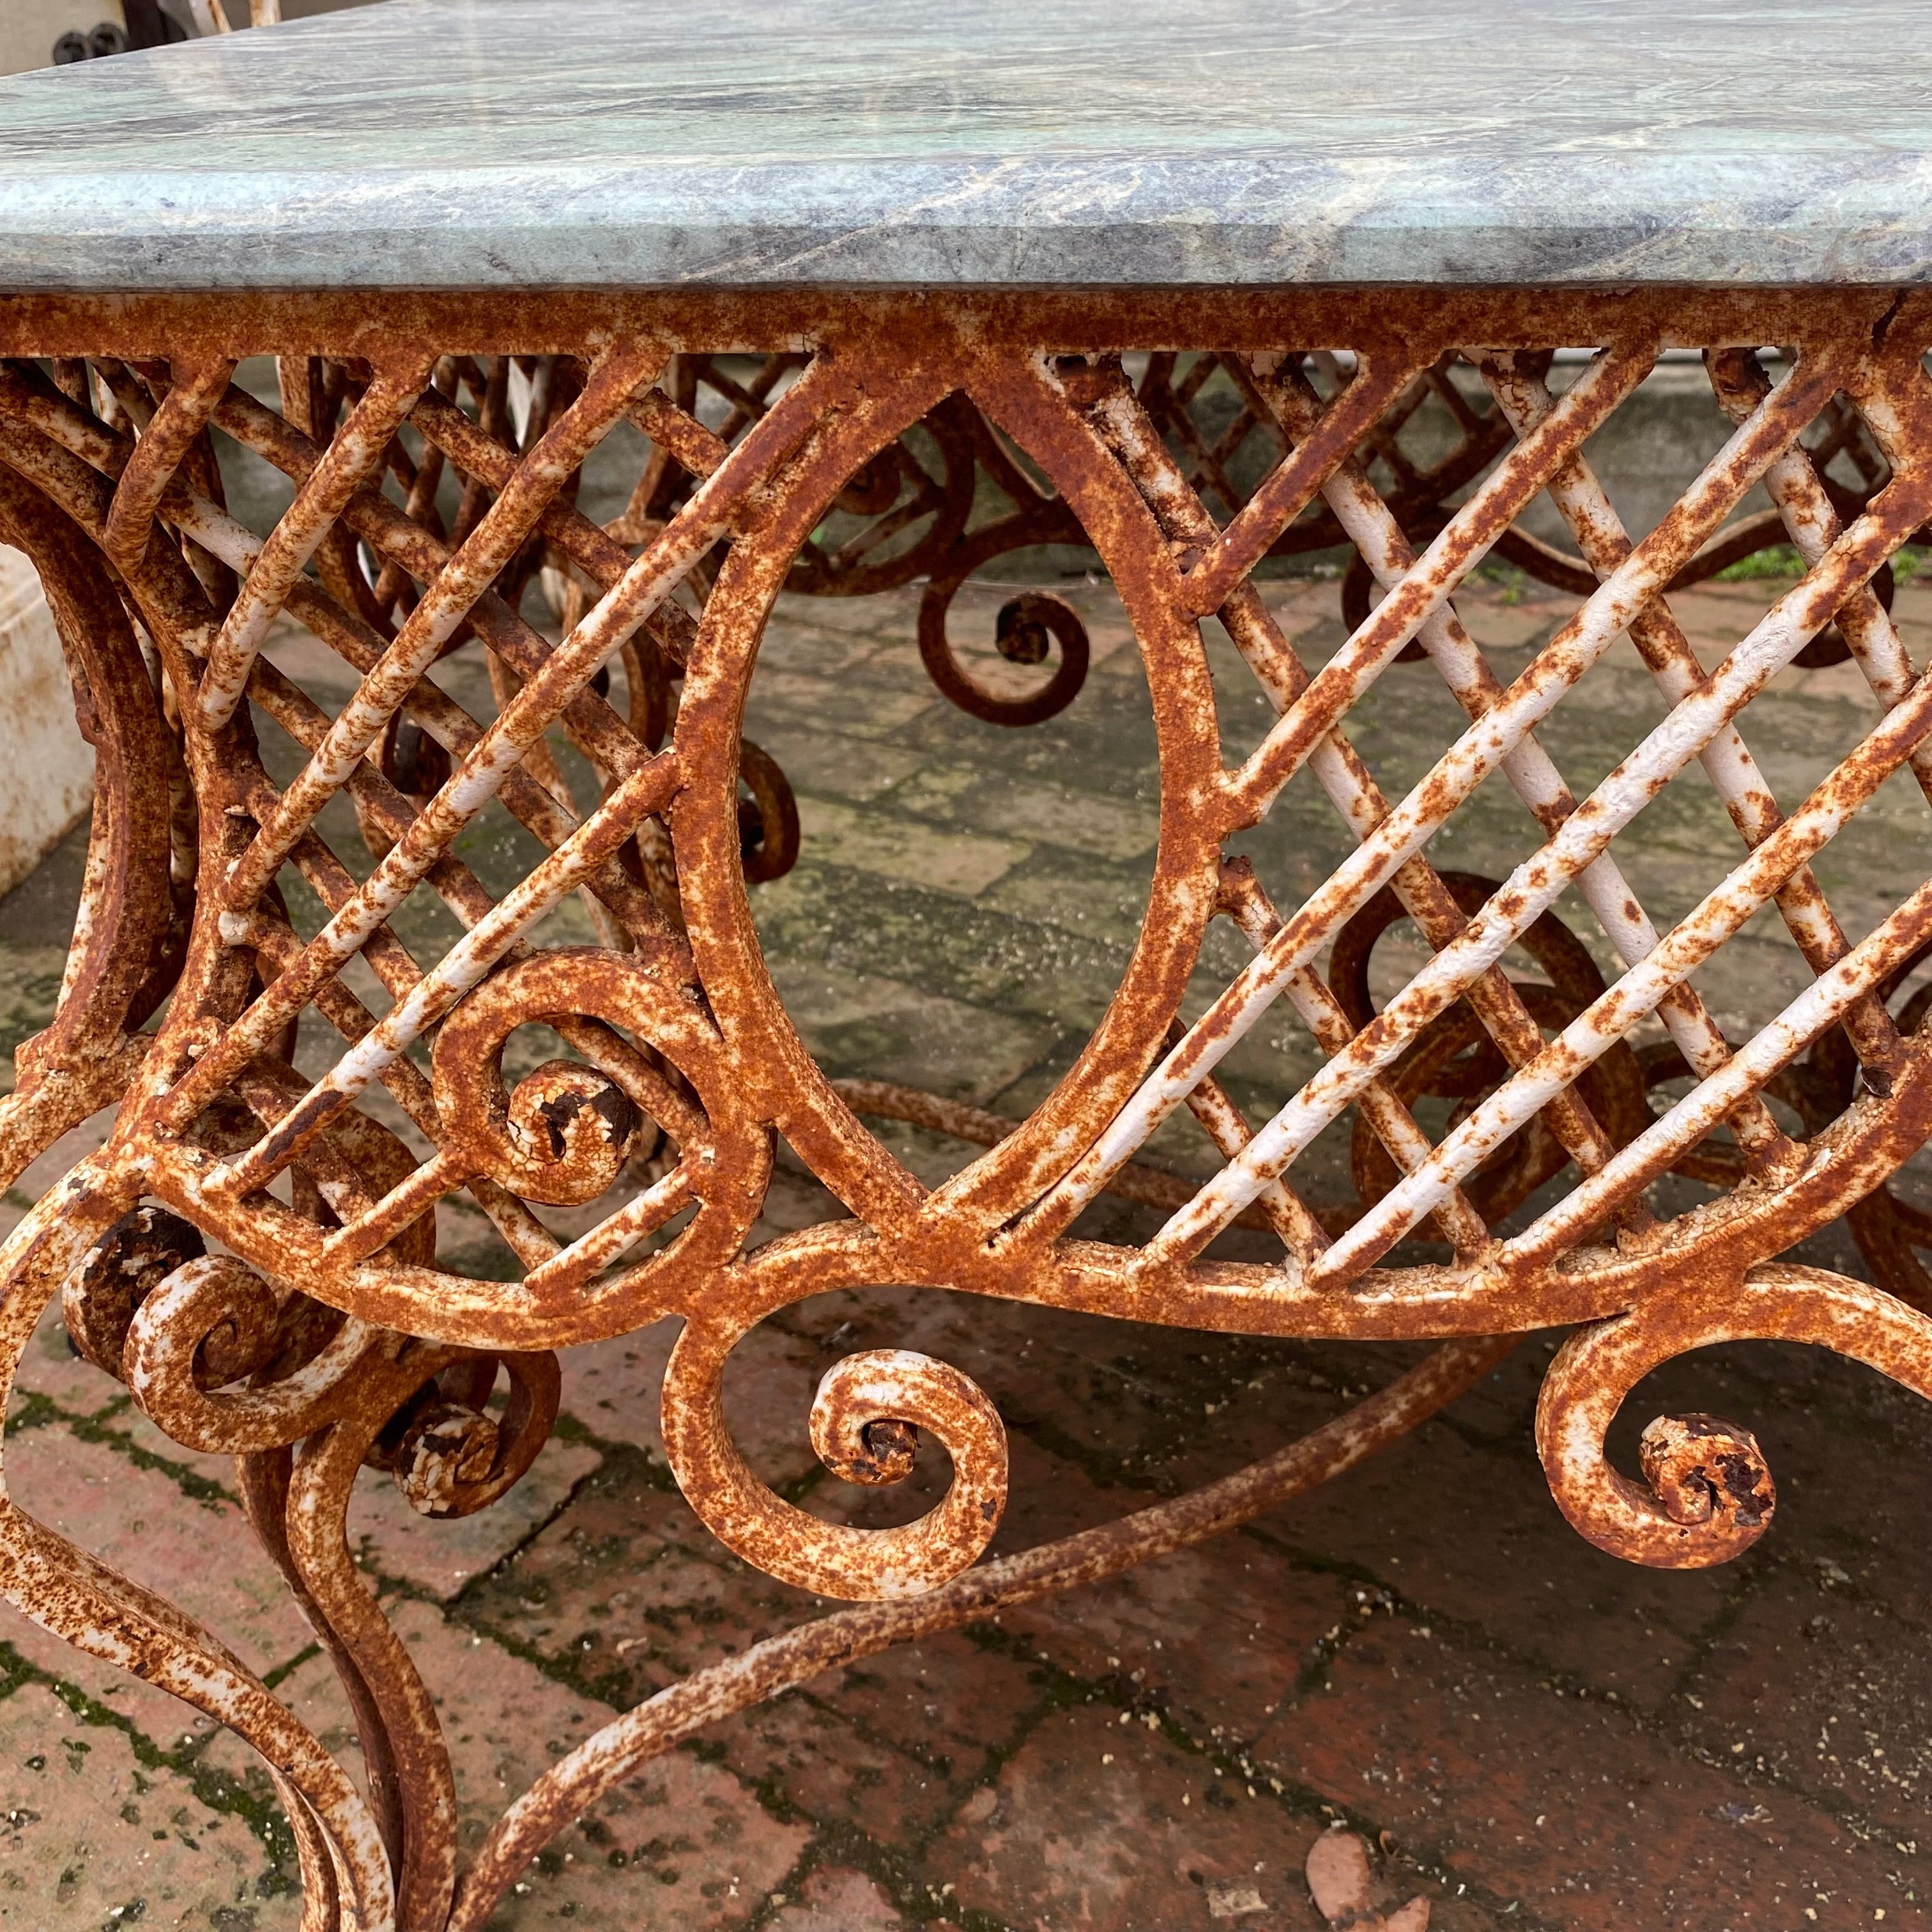 Wrought Iron Coffee Table with Green Marble Top